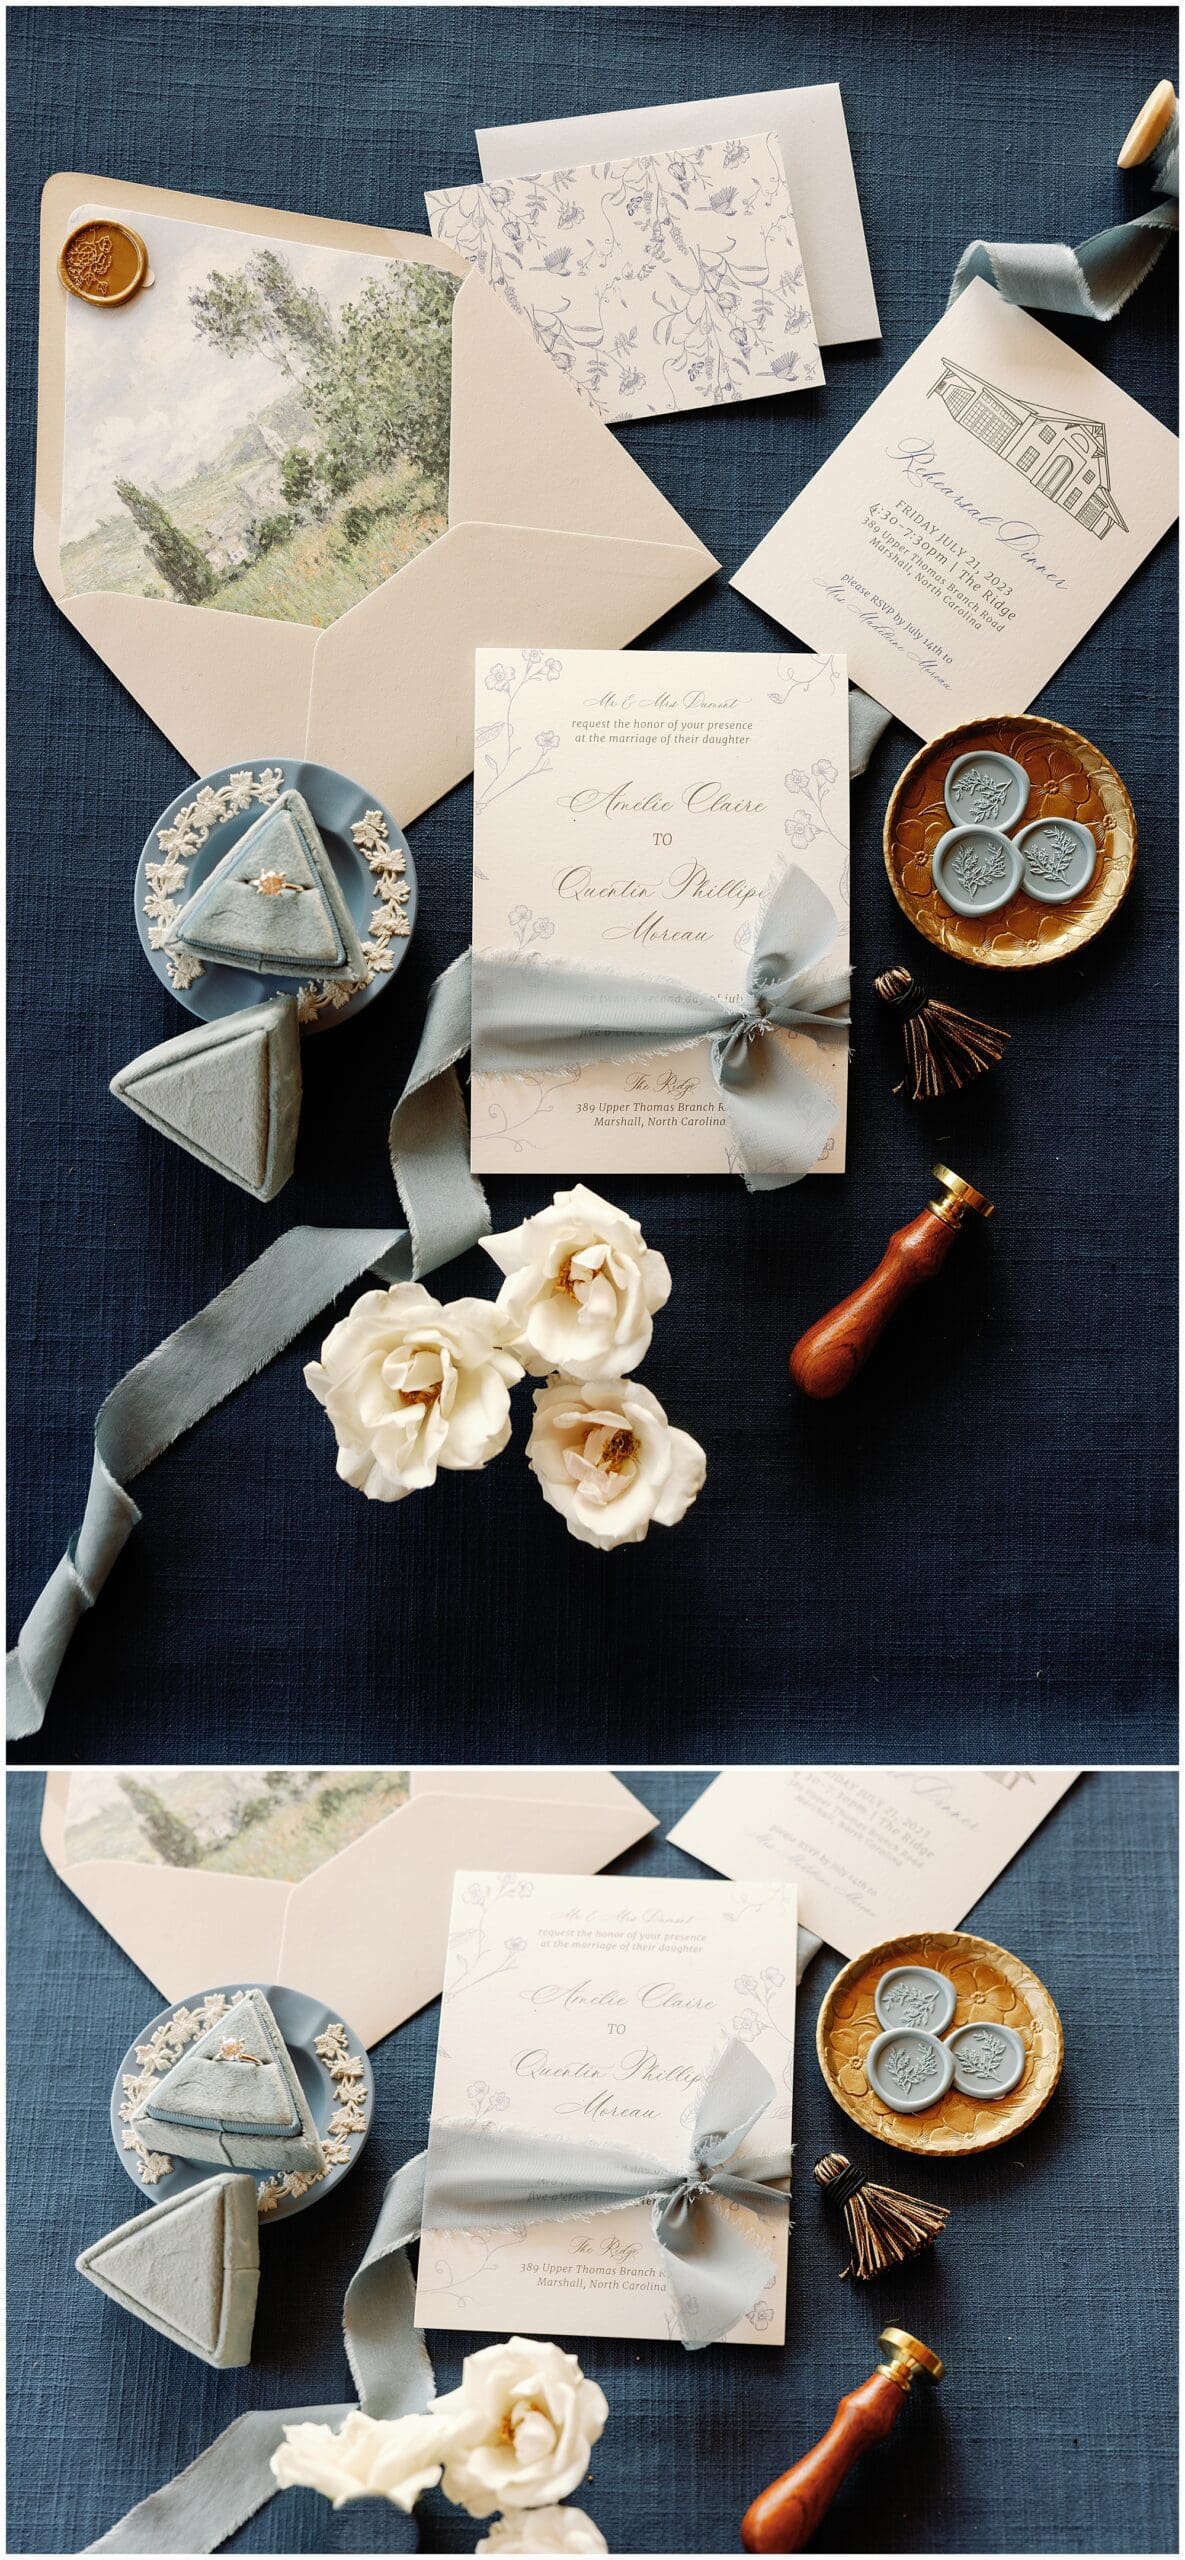 A Parisian-inspired summer wedding stationery set on a table at The Ridge.